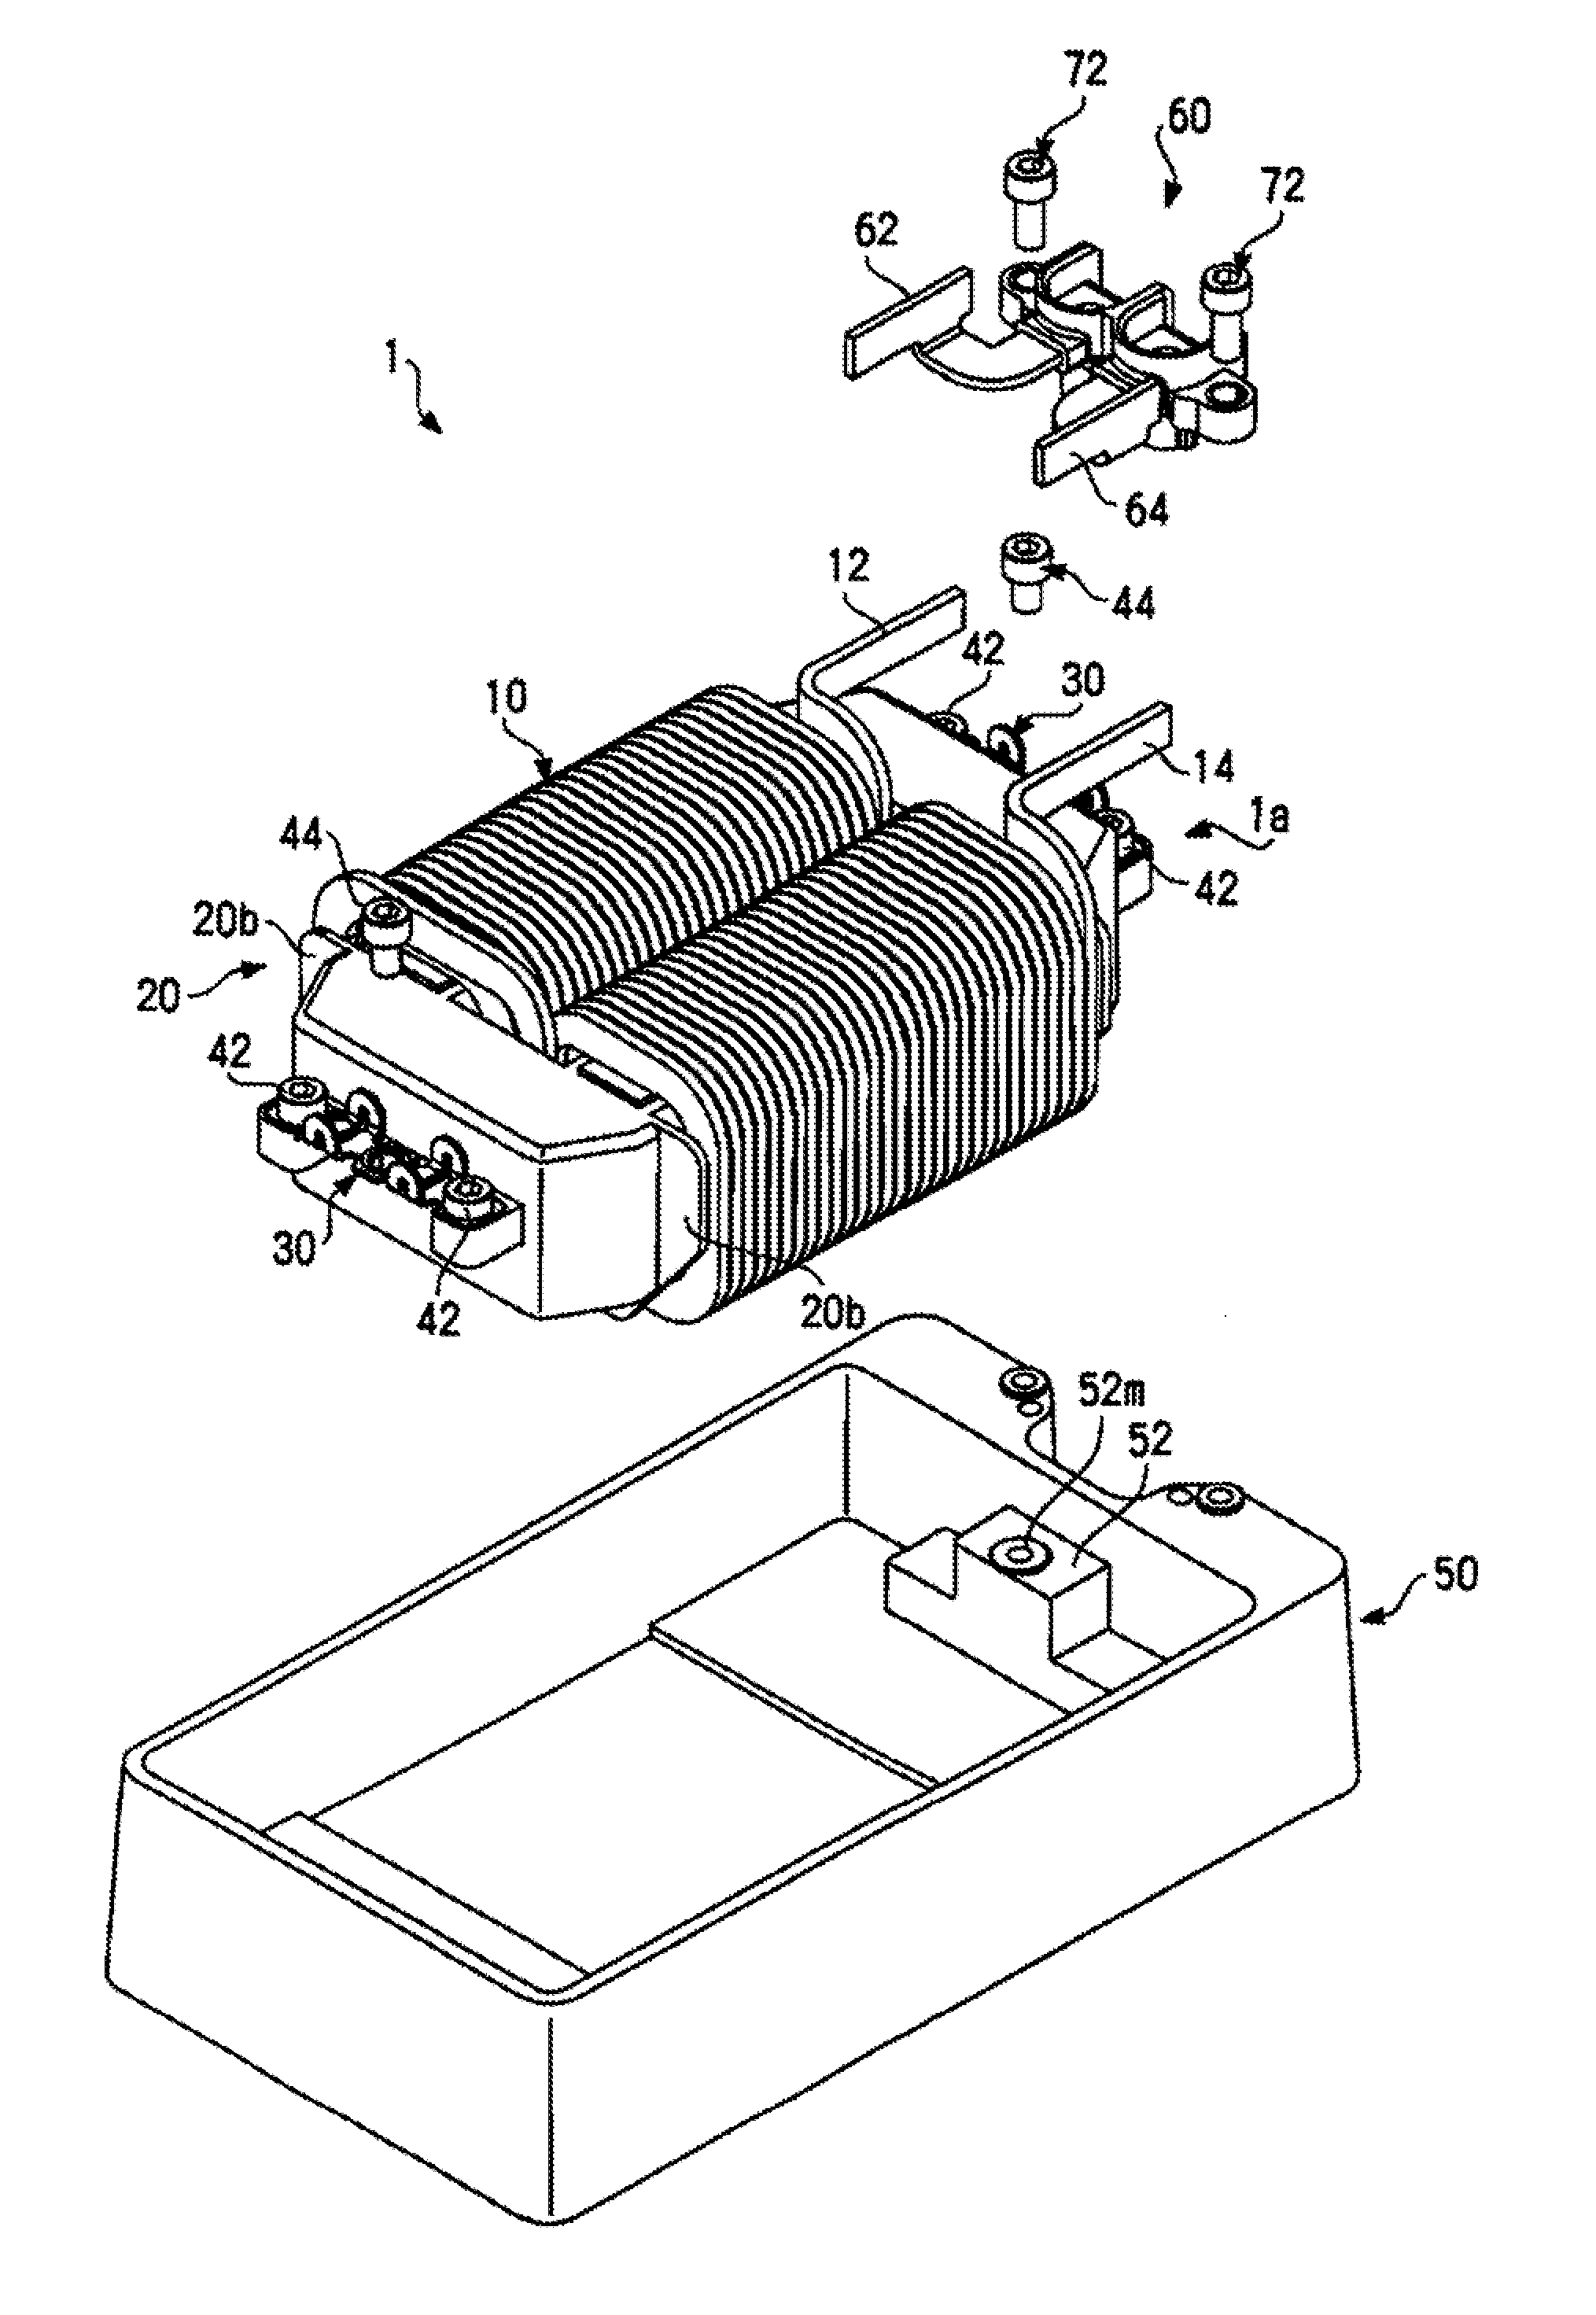 Core fixing member and coil device